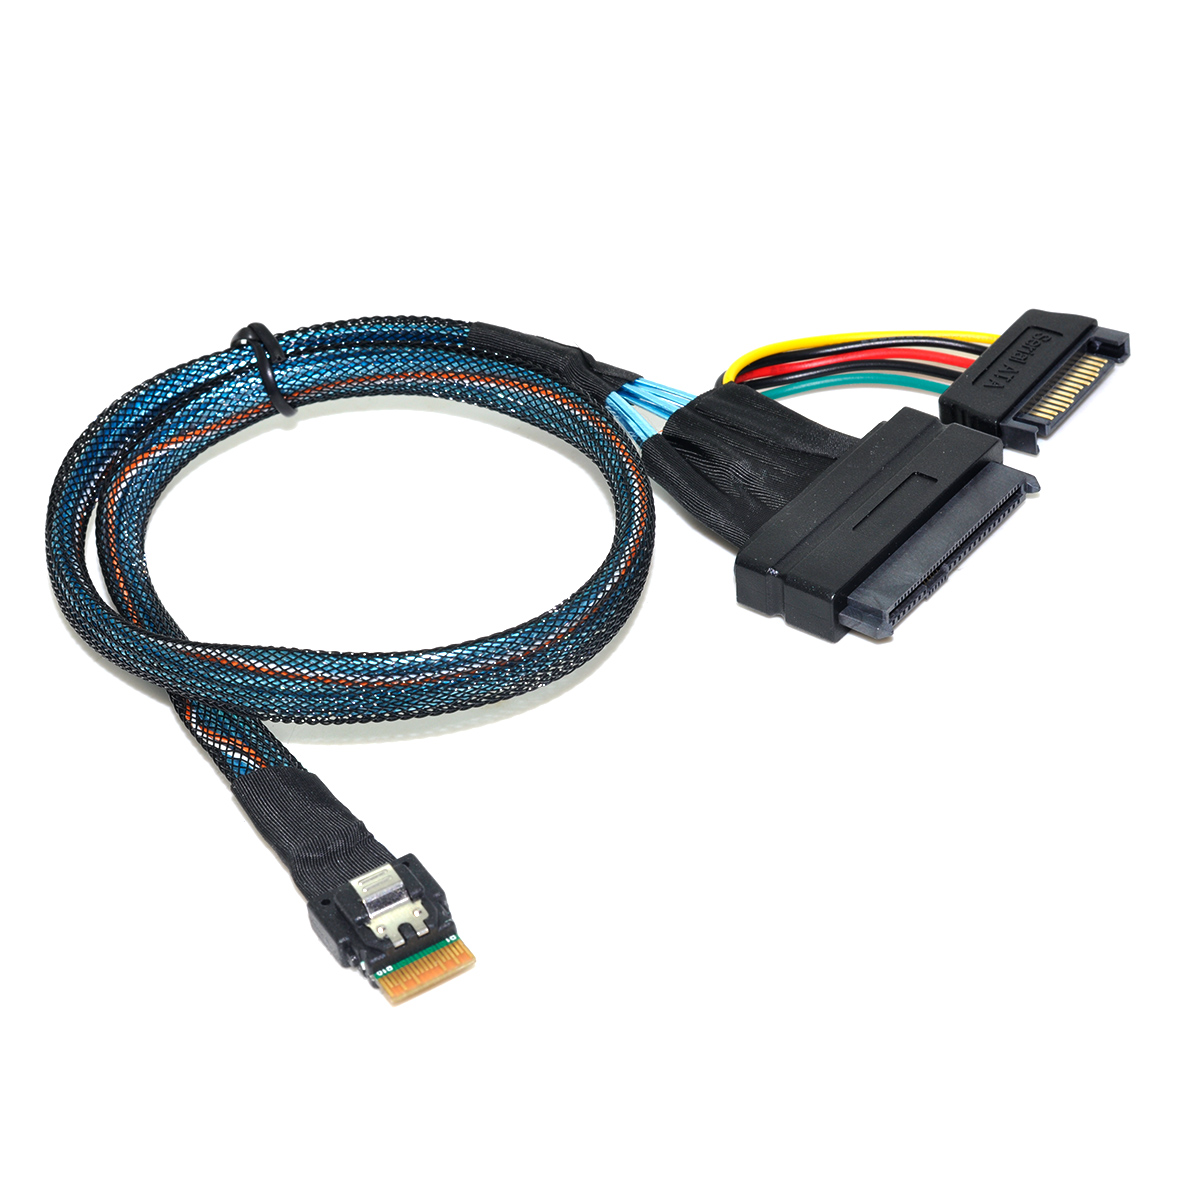 YIWENTEC SFF 8654 4i Slimline sas to SFF 8639 Hard Disk SSD Cable NVME U.2 with 15 Pin SATA Power Cable G0206